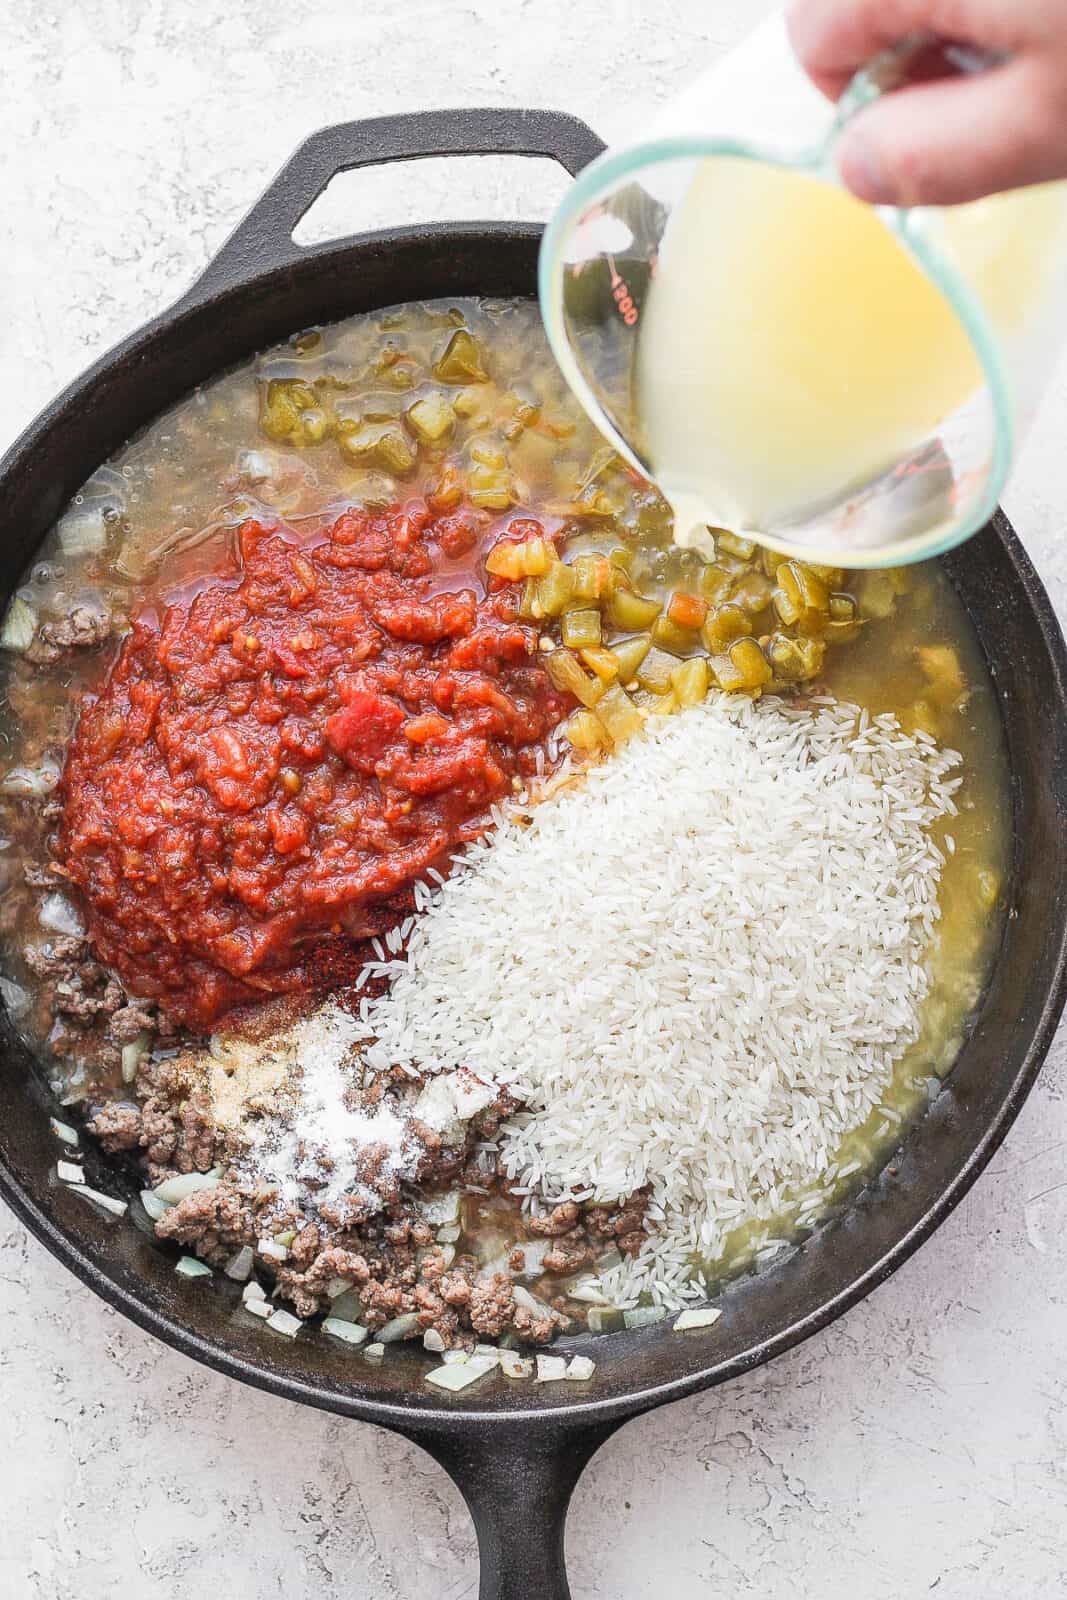 A cast iron skillet filled with ground beef, chile peppers, salsa and rice with someone pouring broth in.